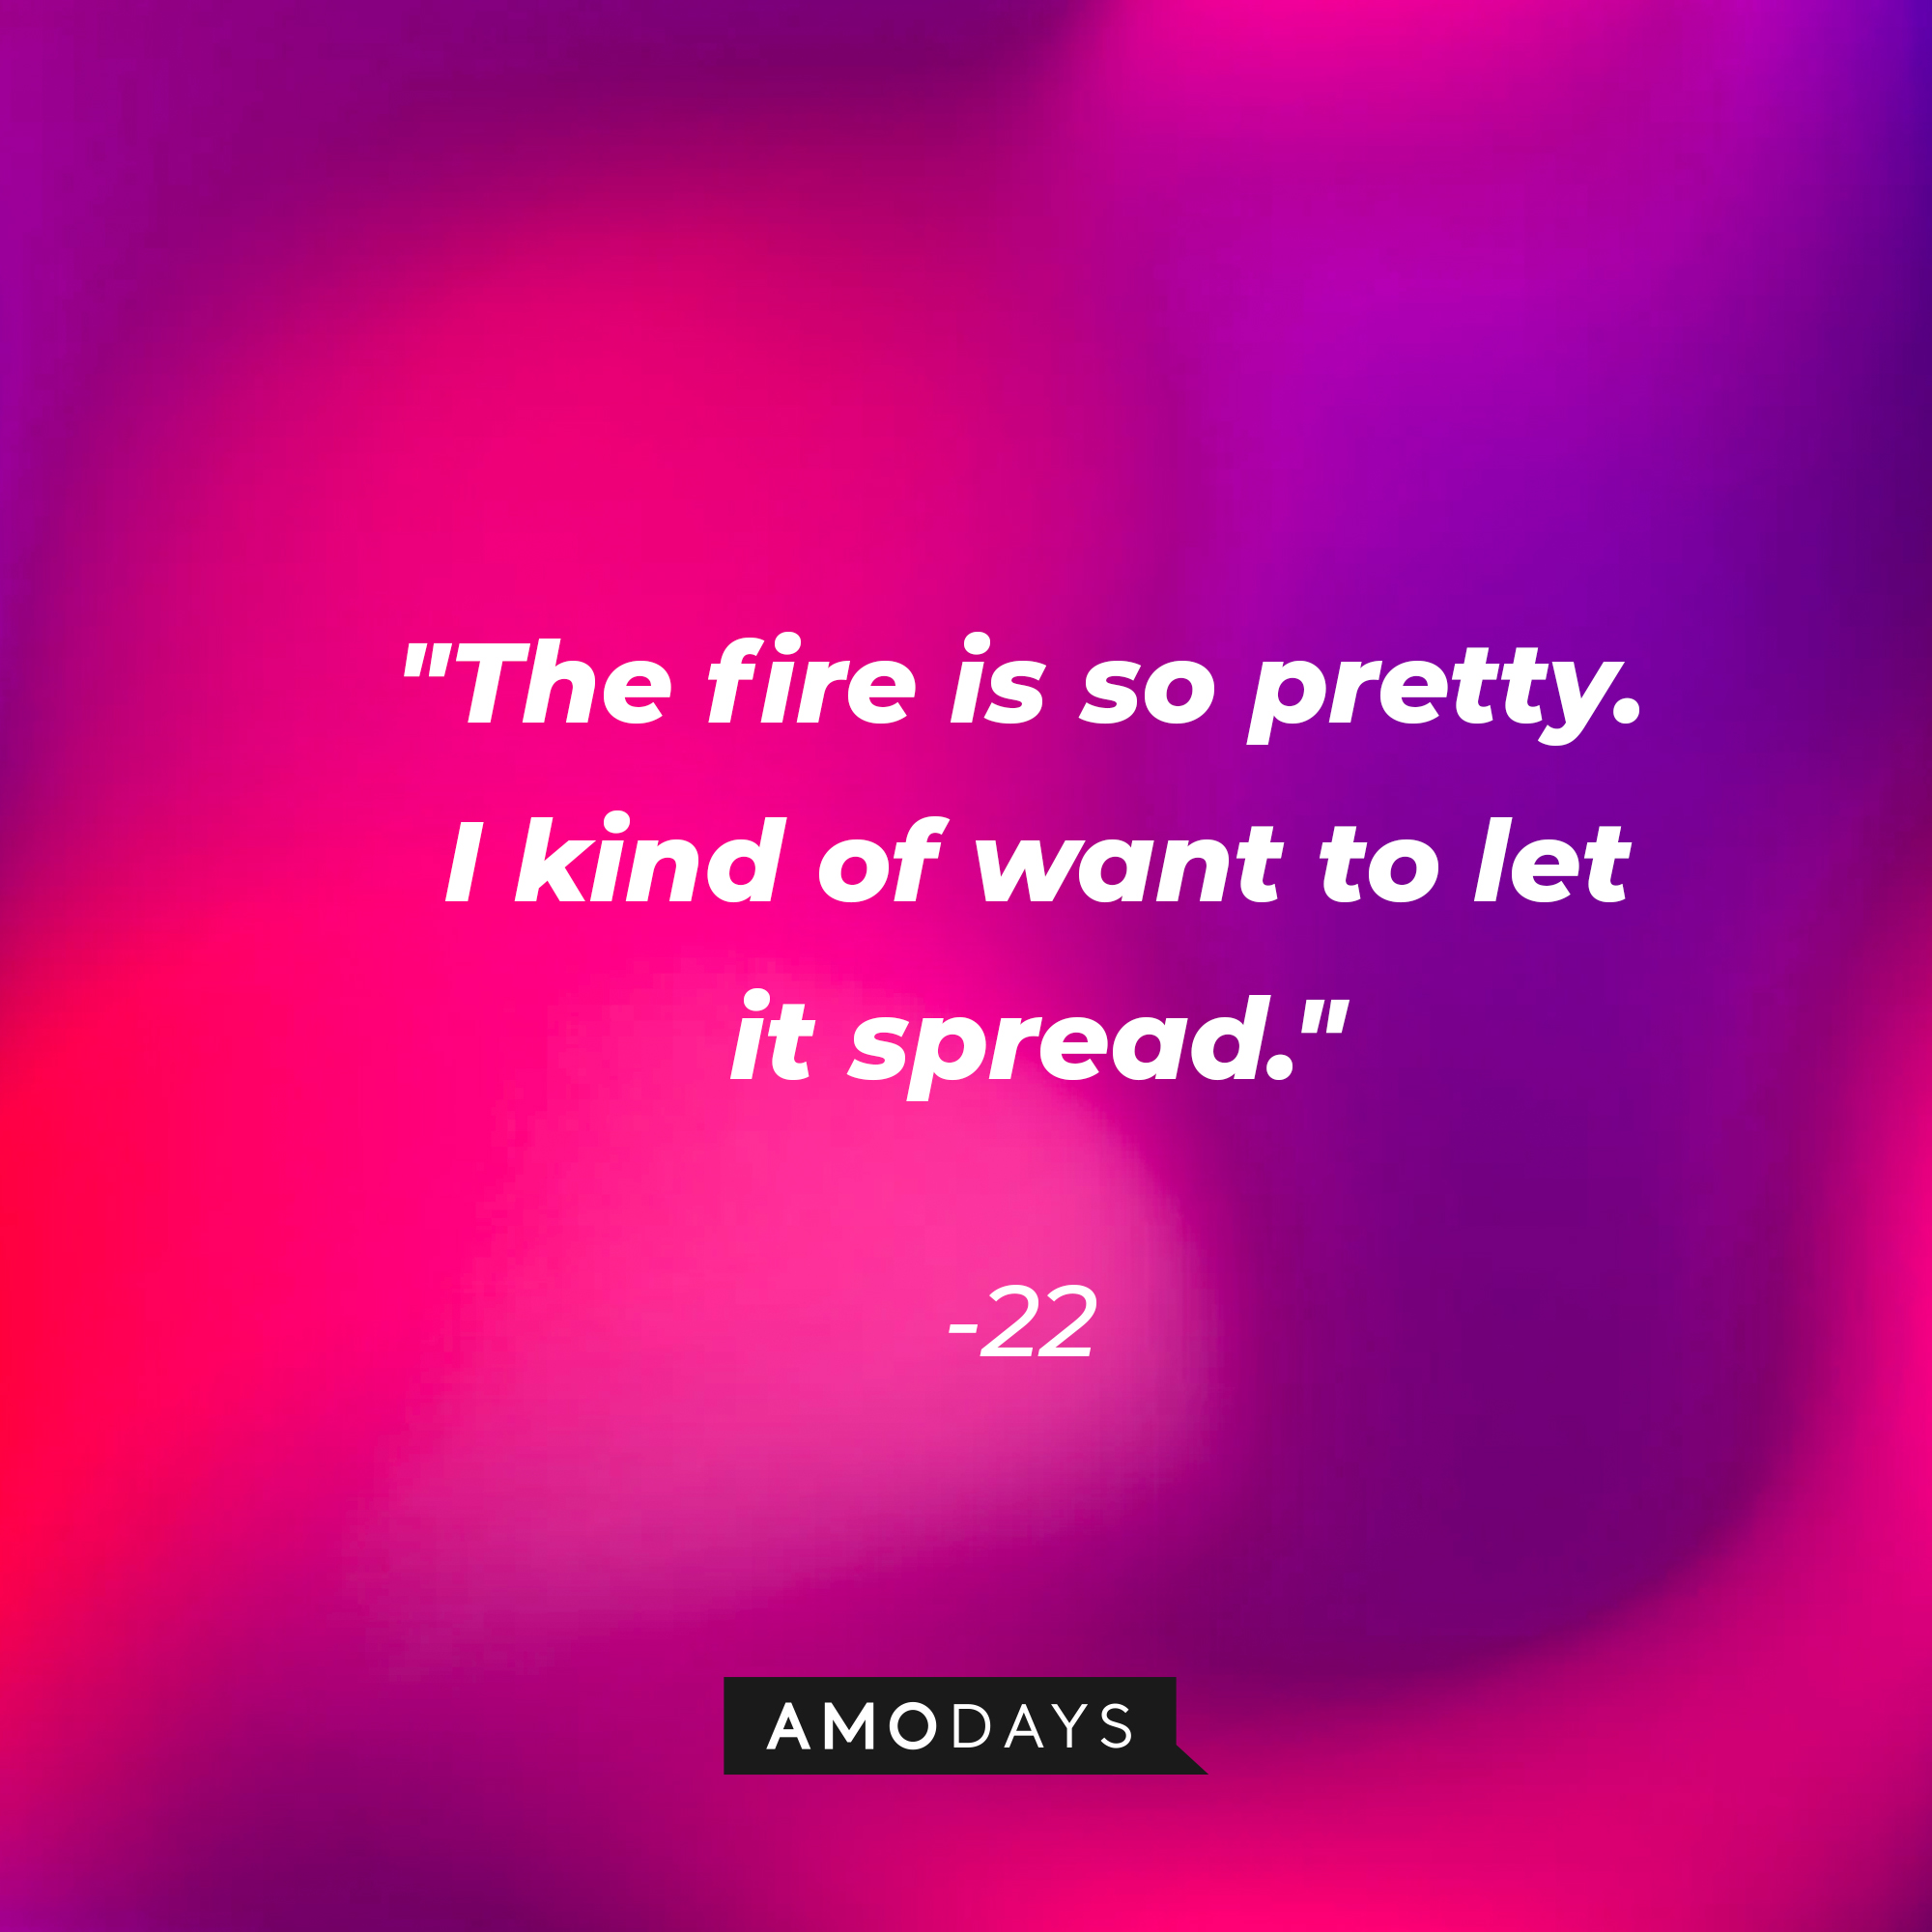 22's quote: "The fire is so pretty. I kind of want to let it spread." | Source: Amomama